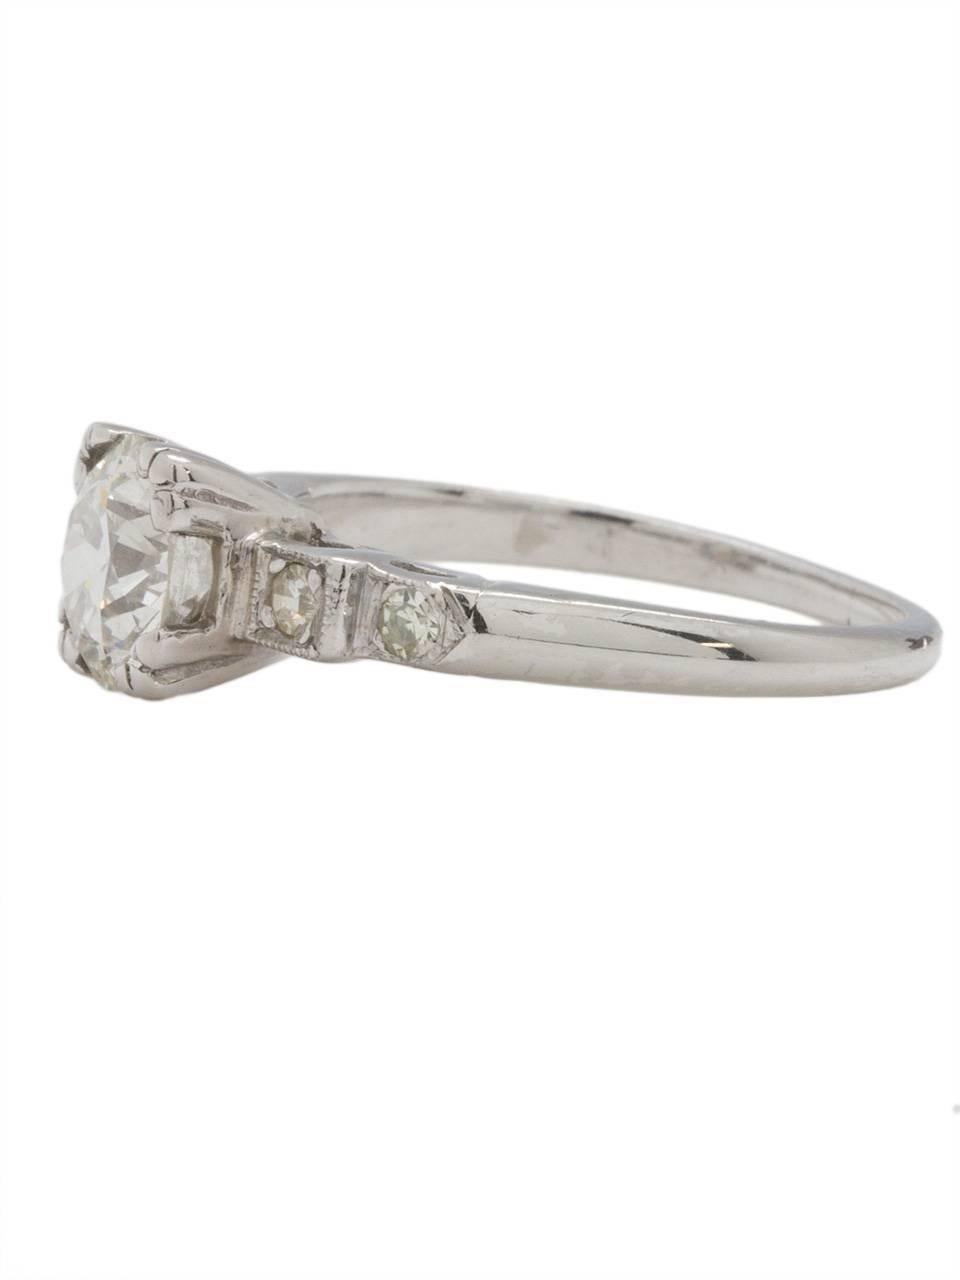 This classic vintage platinum engagement ring from the 1930s features a captivating 1.22 carat Old European Cut center diamond, J-VS1. Four petite bead set round side diamonds are the perfect accent to the center stone setting. Open side galleries